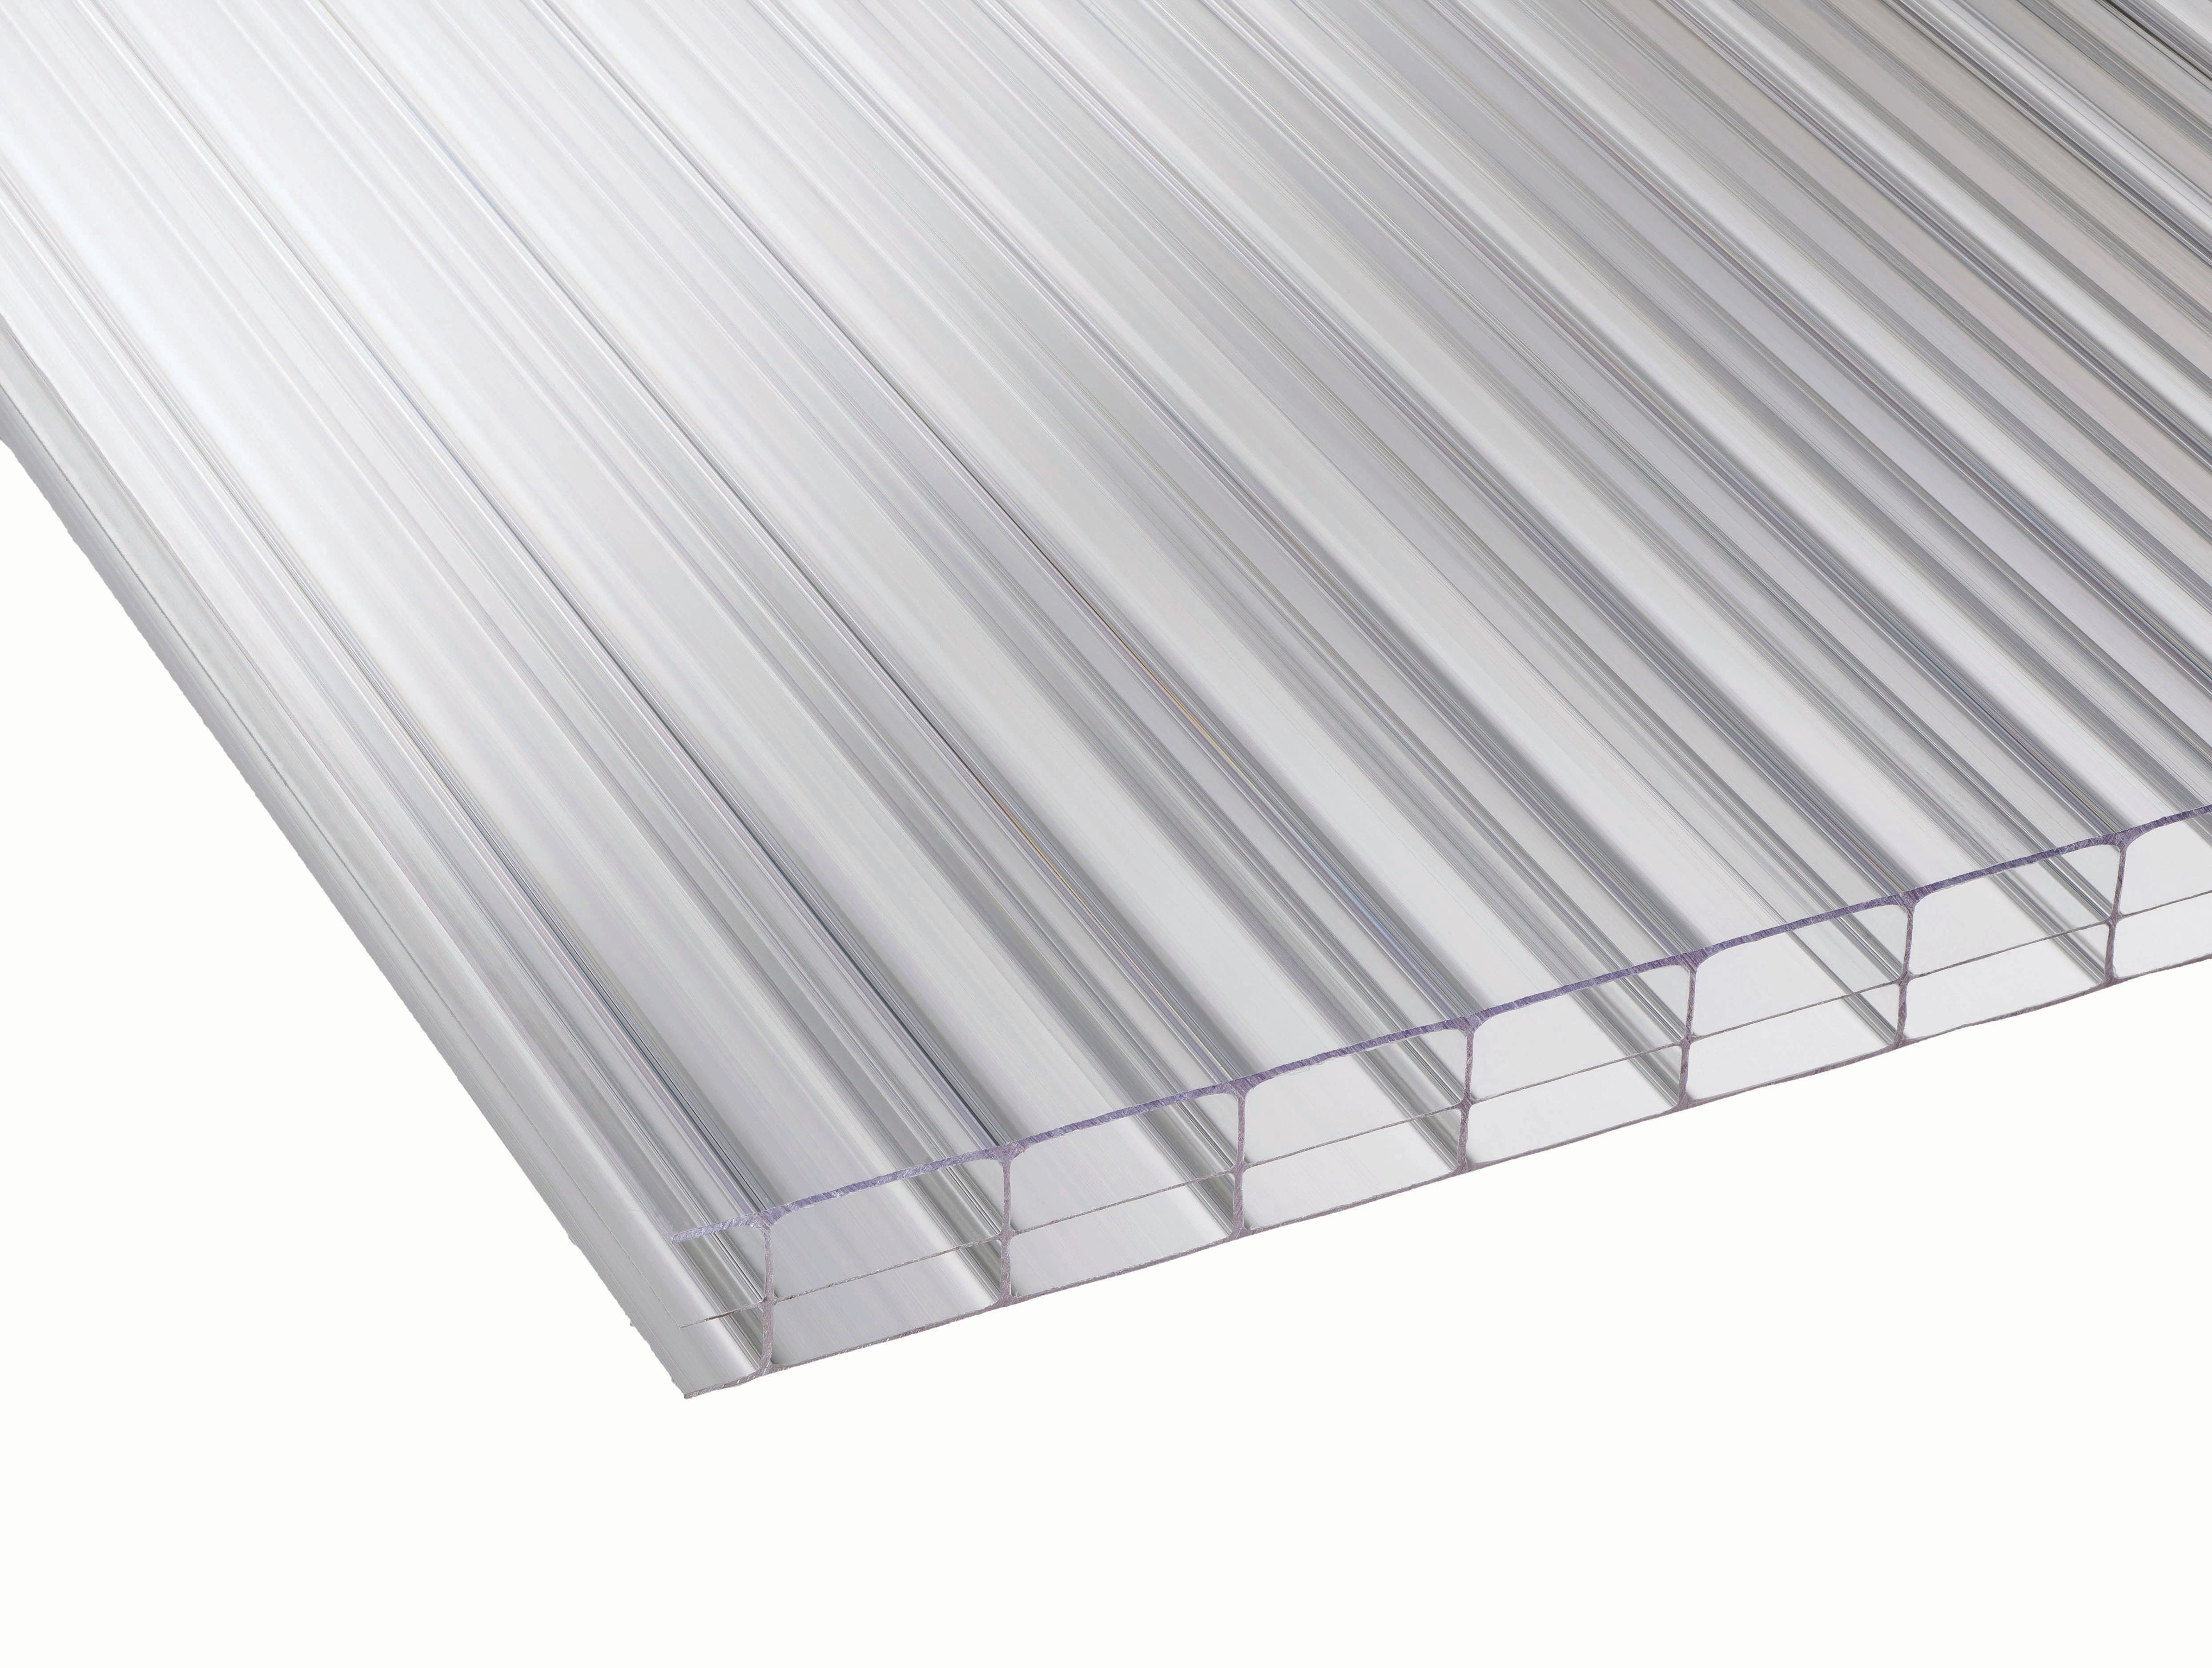 Image of 16mm Clear Multiwall Polycarbonate Sheet - 3000 x 700mm